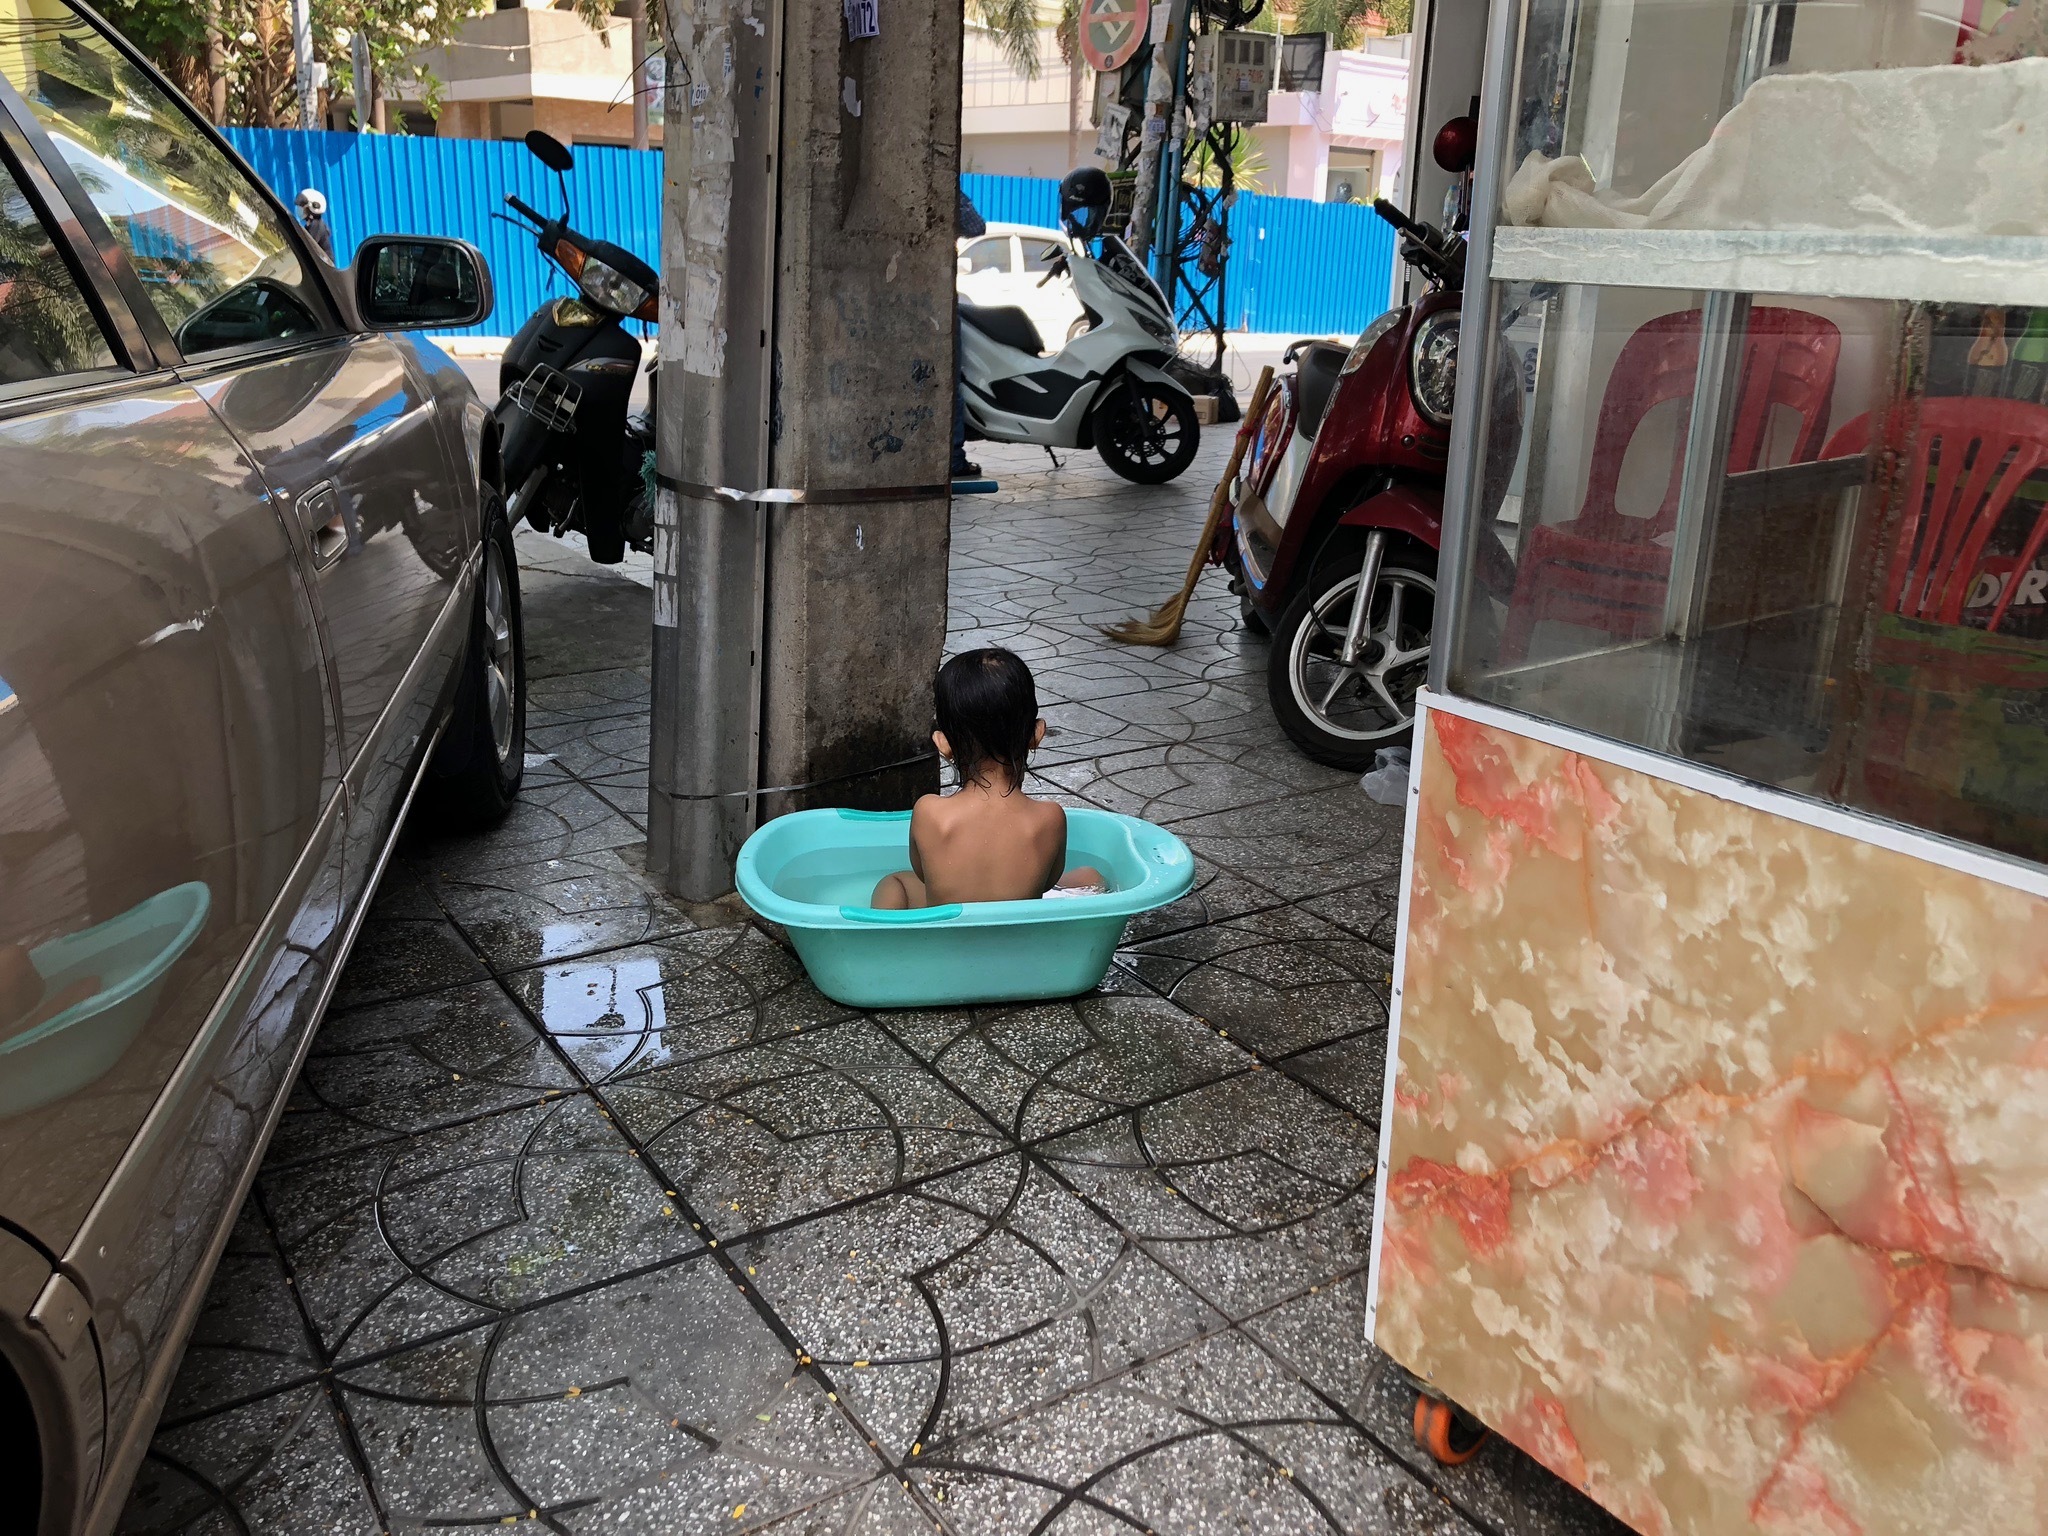 A young boy cooling down in the concrete jungle of Phnom Penn, Cambodia.